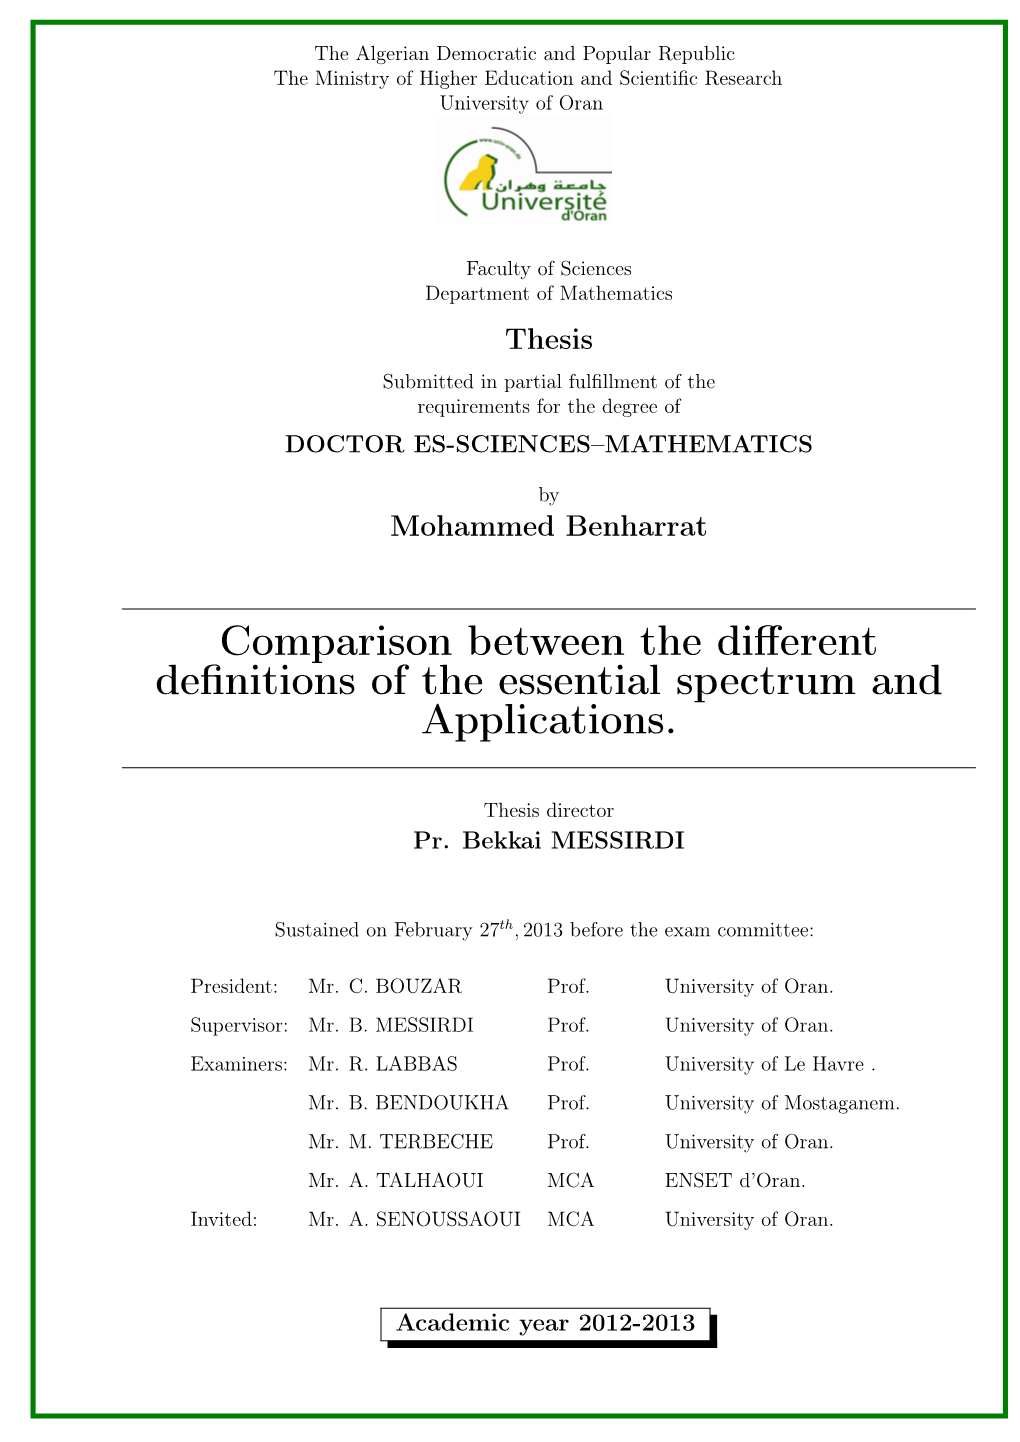 Comparison Between the Different Definitions of the Essential Spectrum